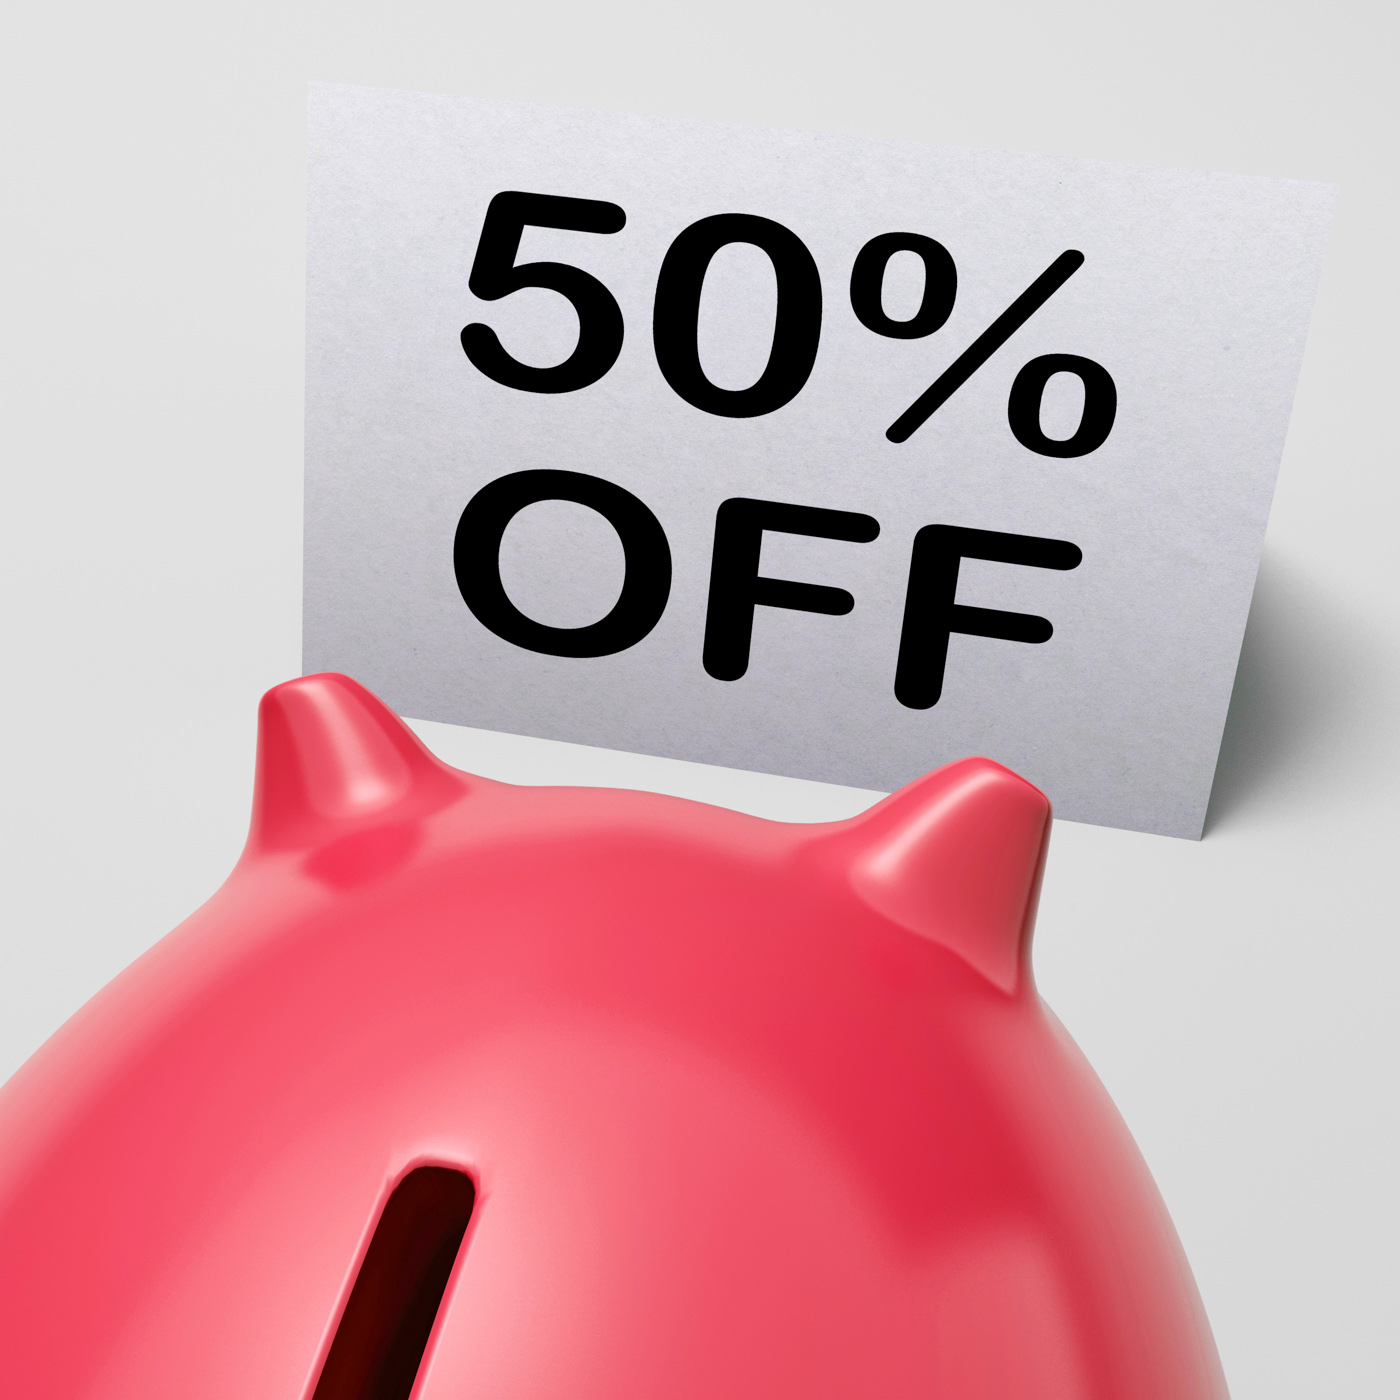 Fifty percent off piggy bank shows 50 half-price promotion photo